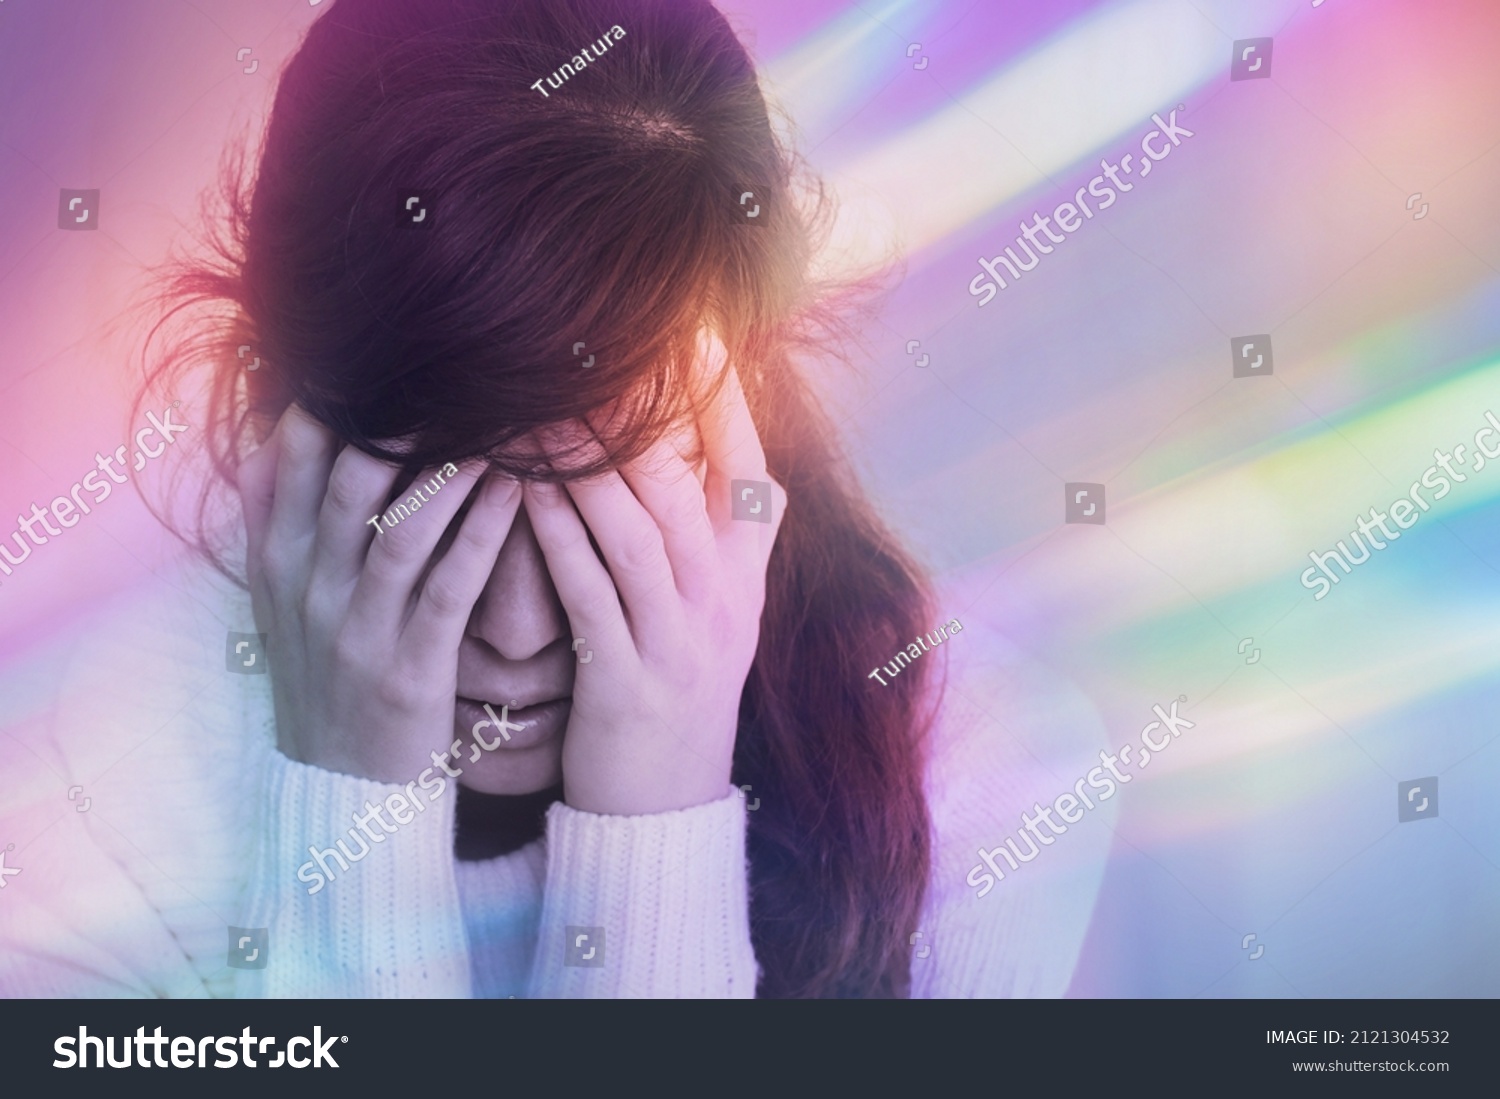 Migraine aura - Portrait of young woman suffering from headache, epilepsy or other problem #2121304532